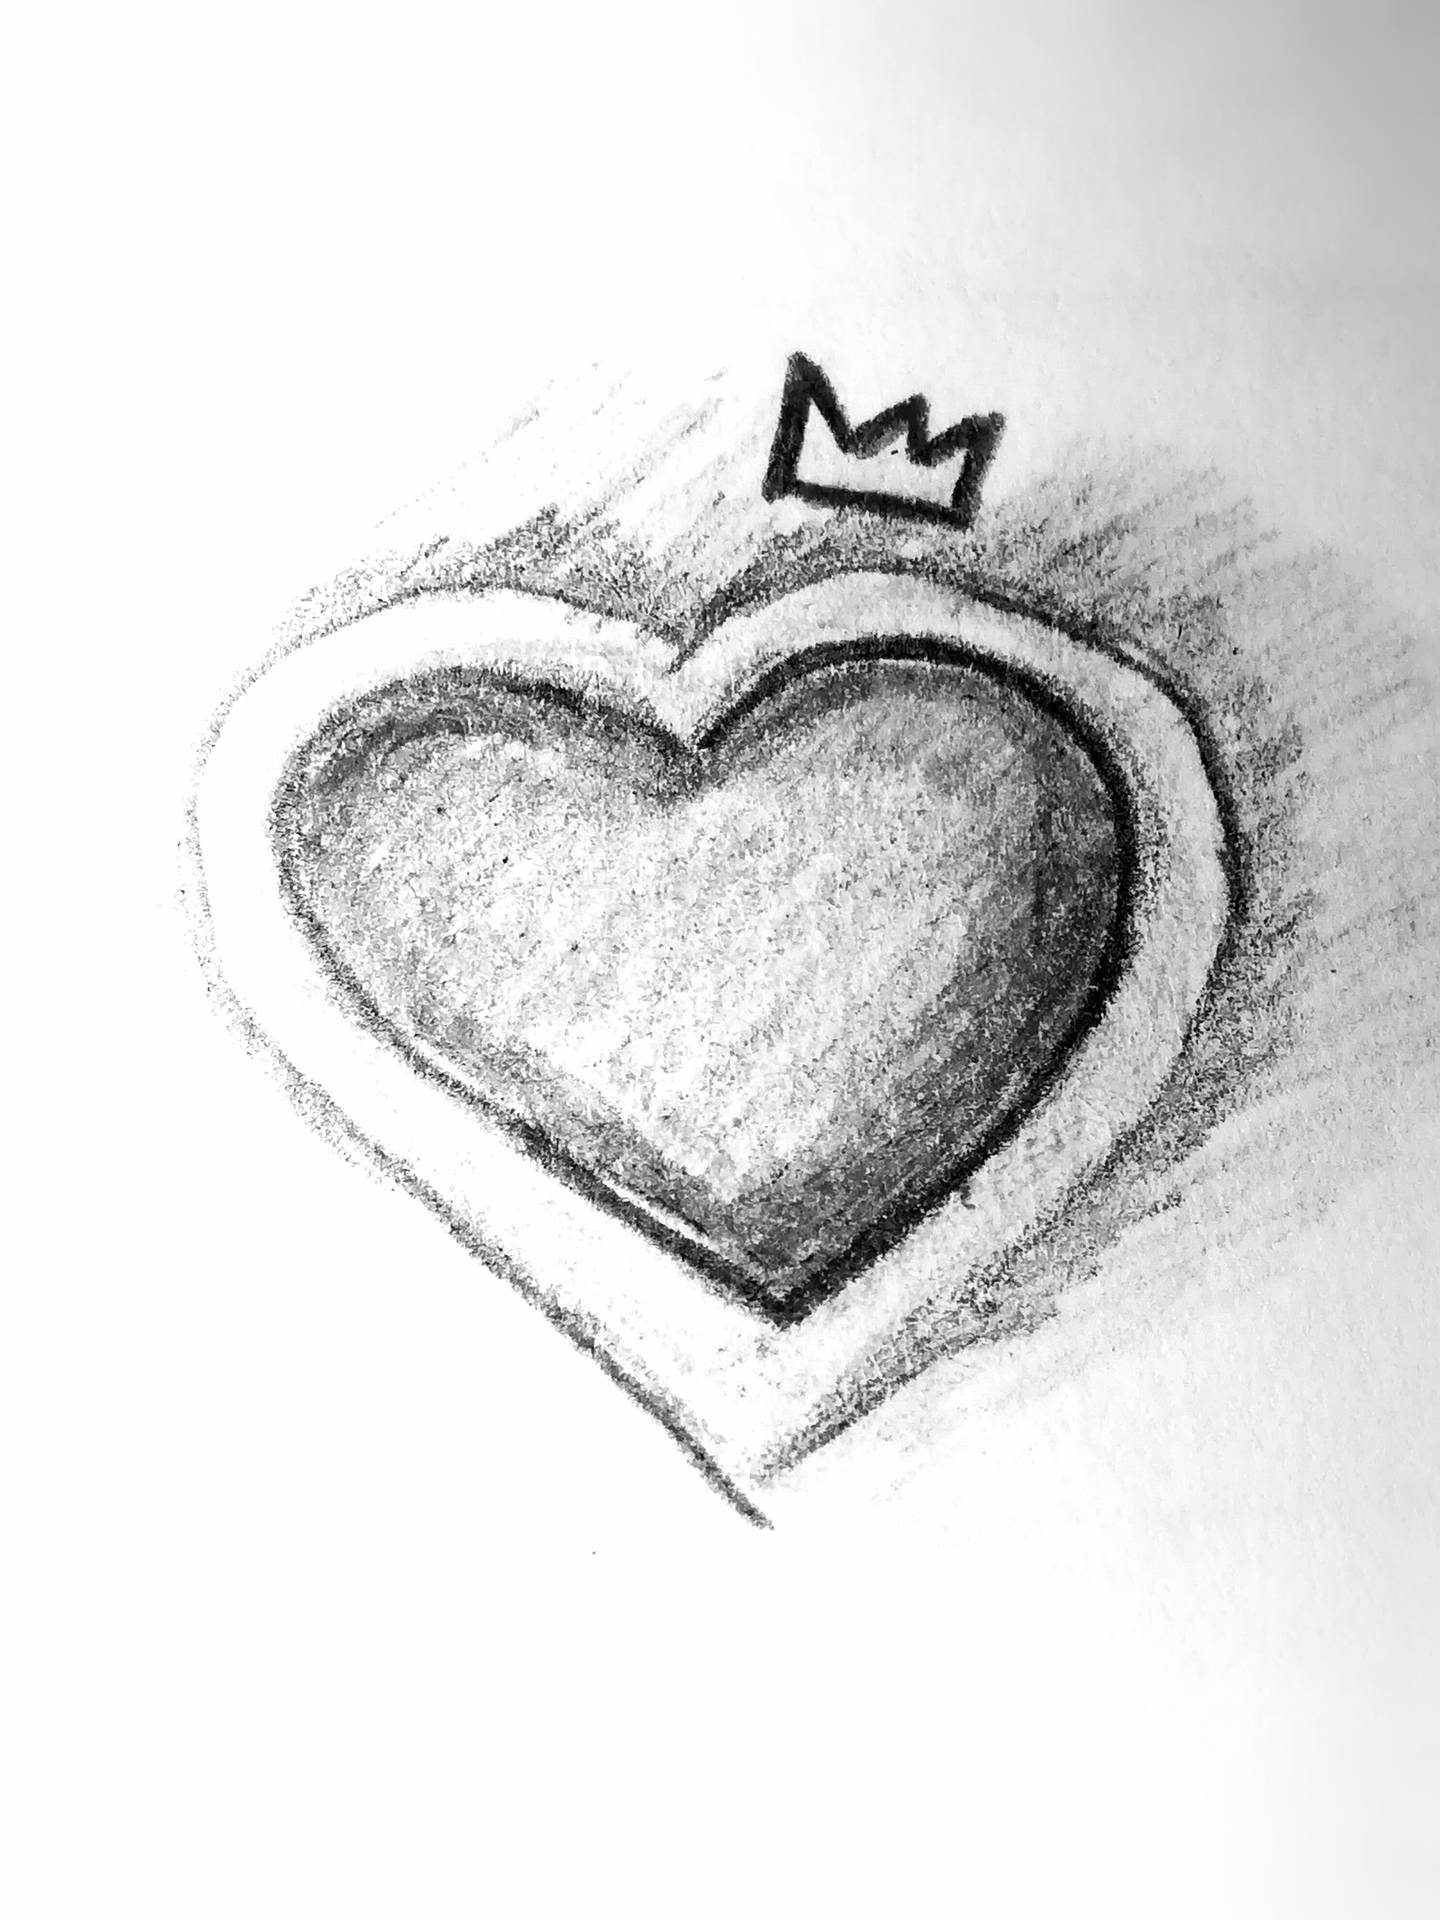 Black And White Heart Sketch Background